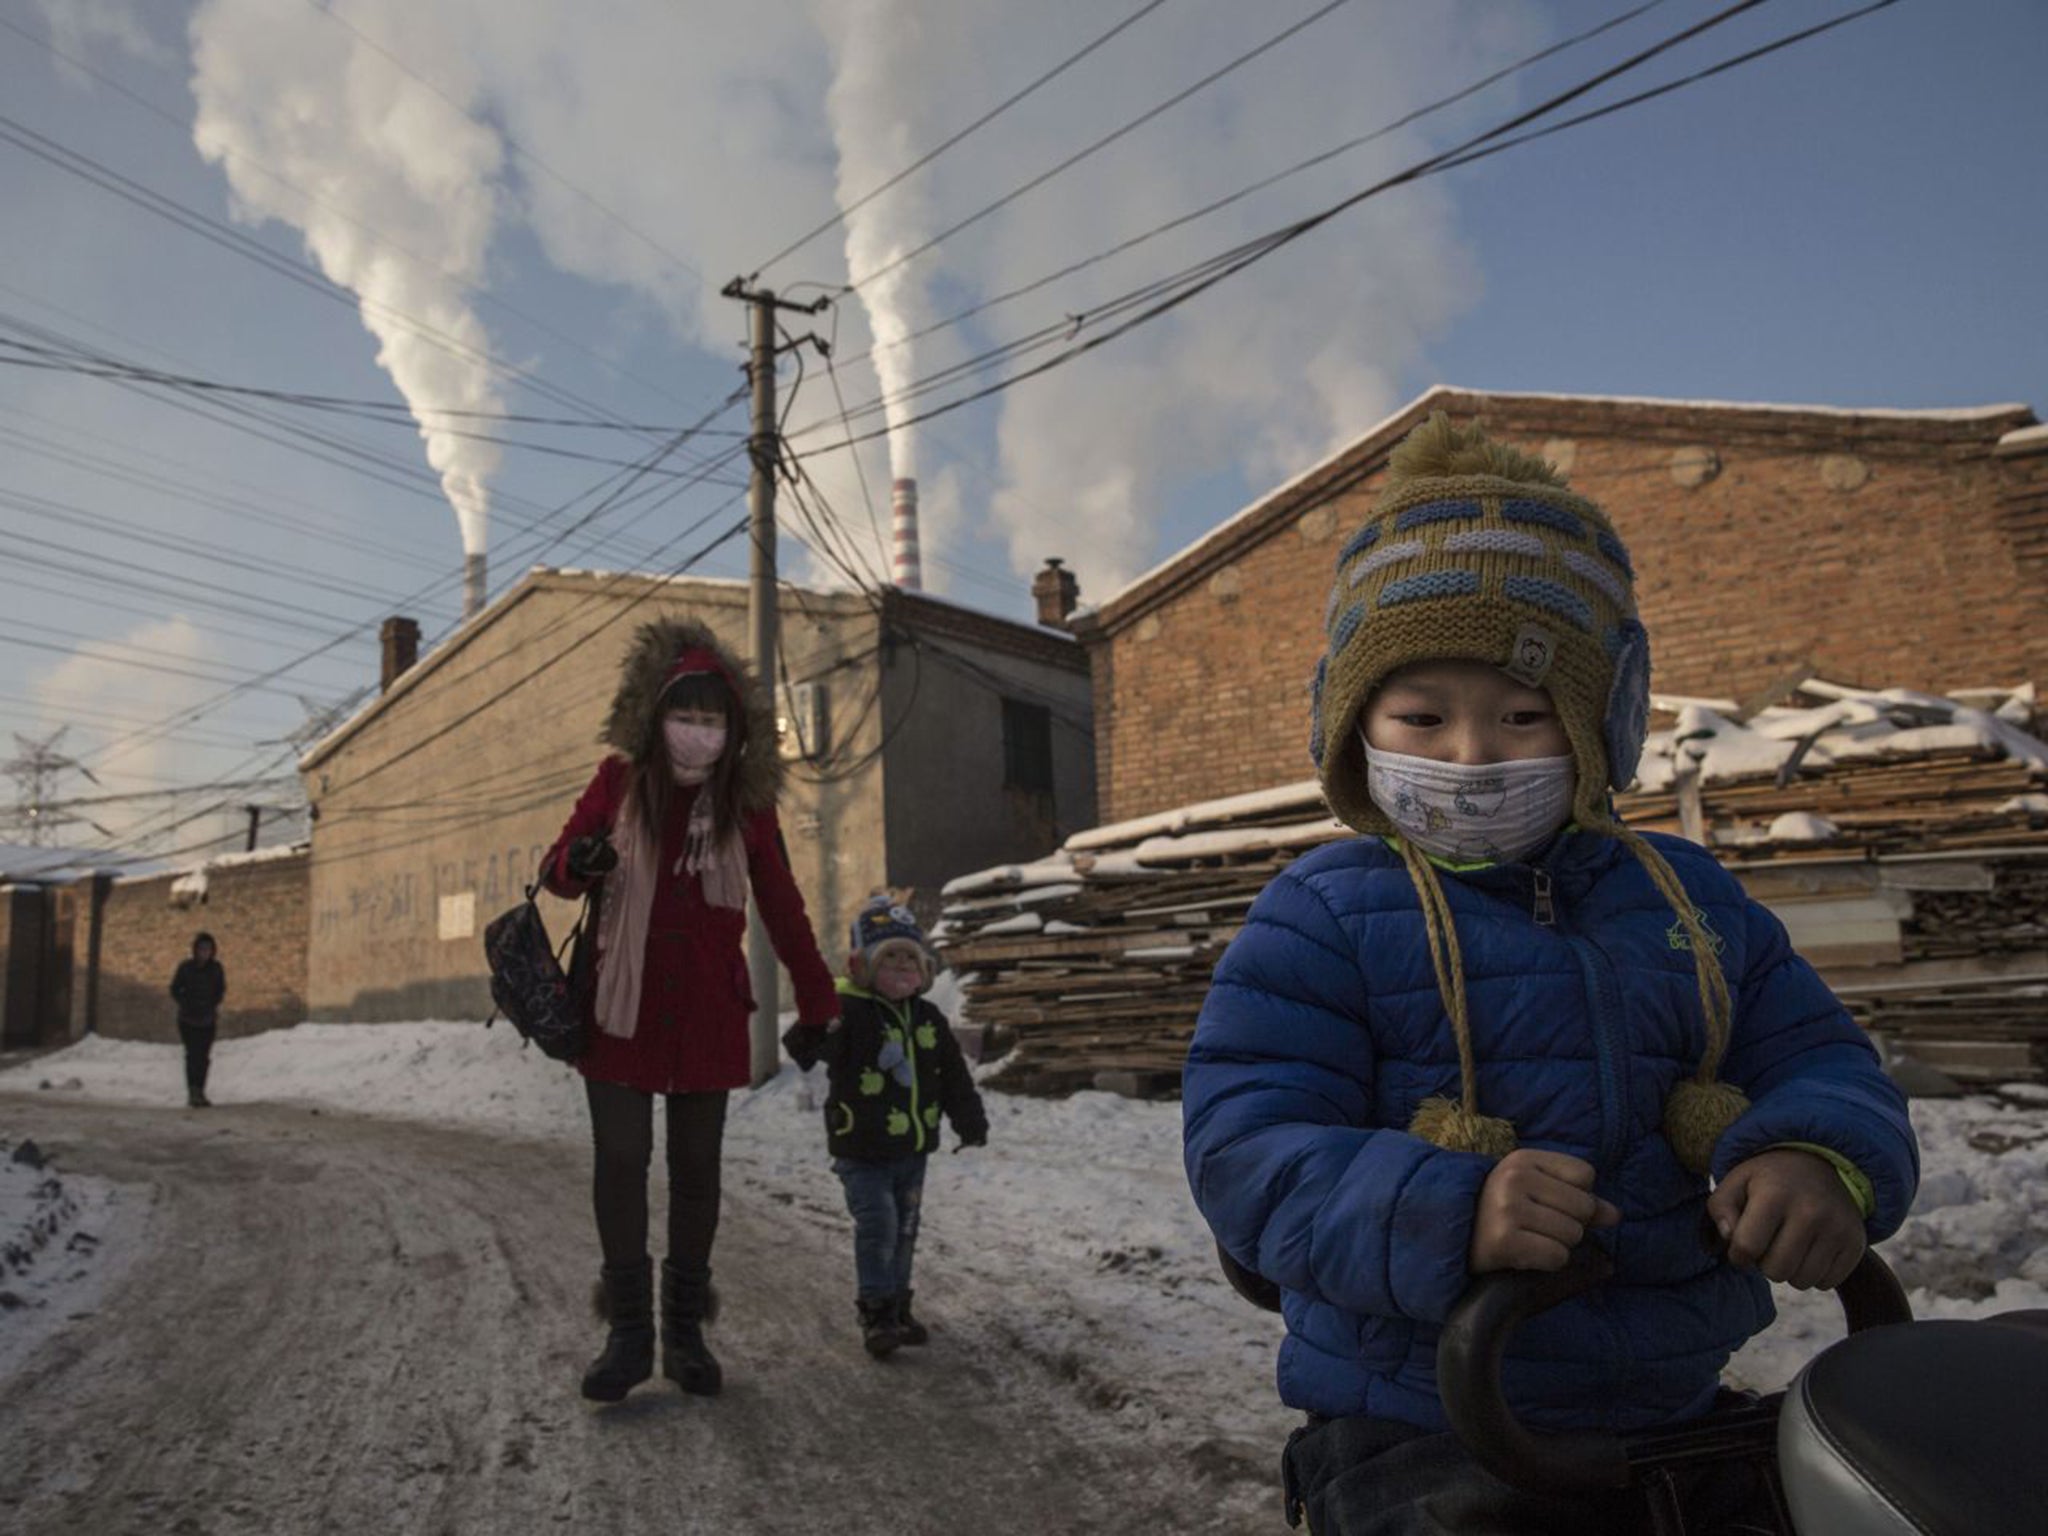 Shanxi, China: this is the first time China, one of the world’s biggest polluters, is bound to cut emissions